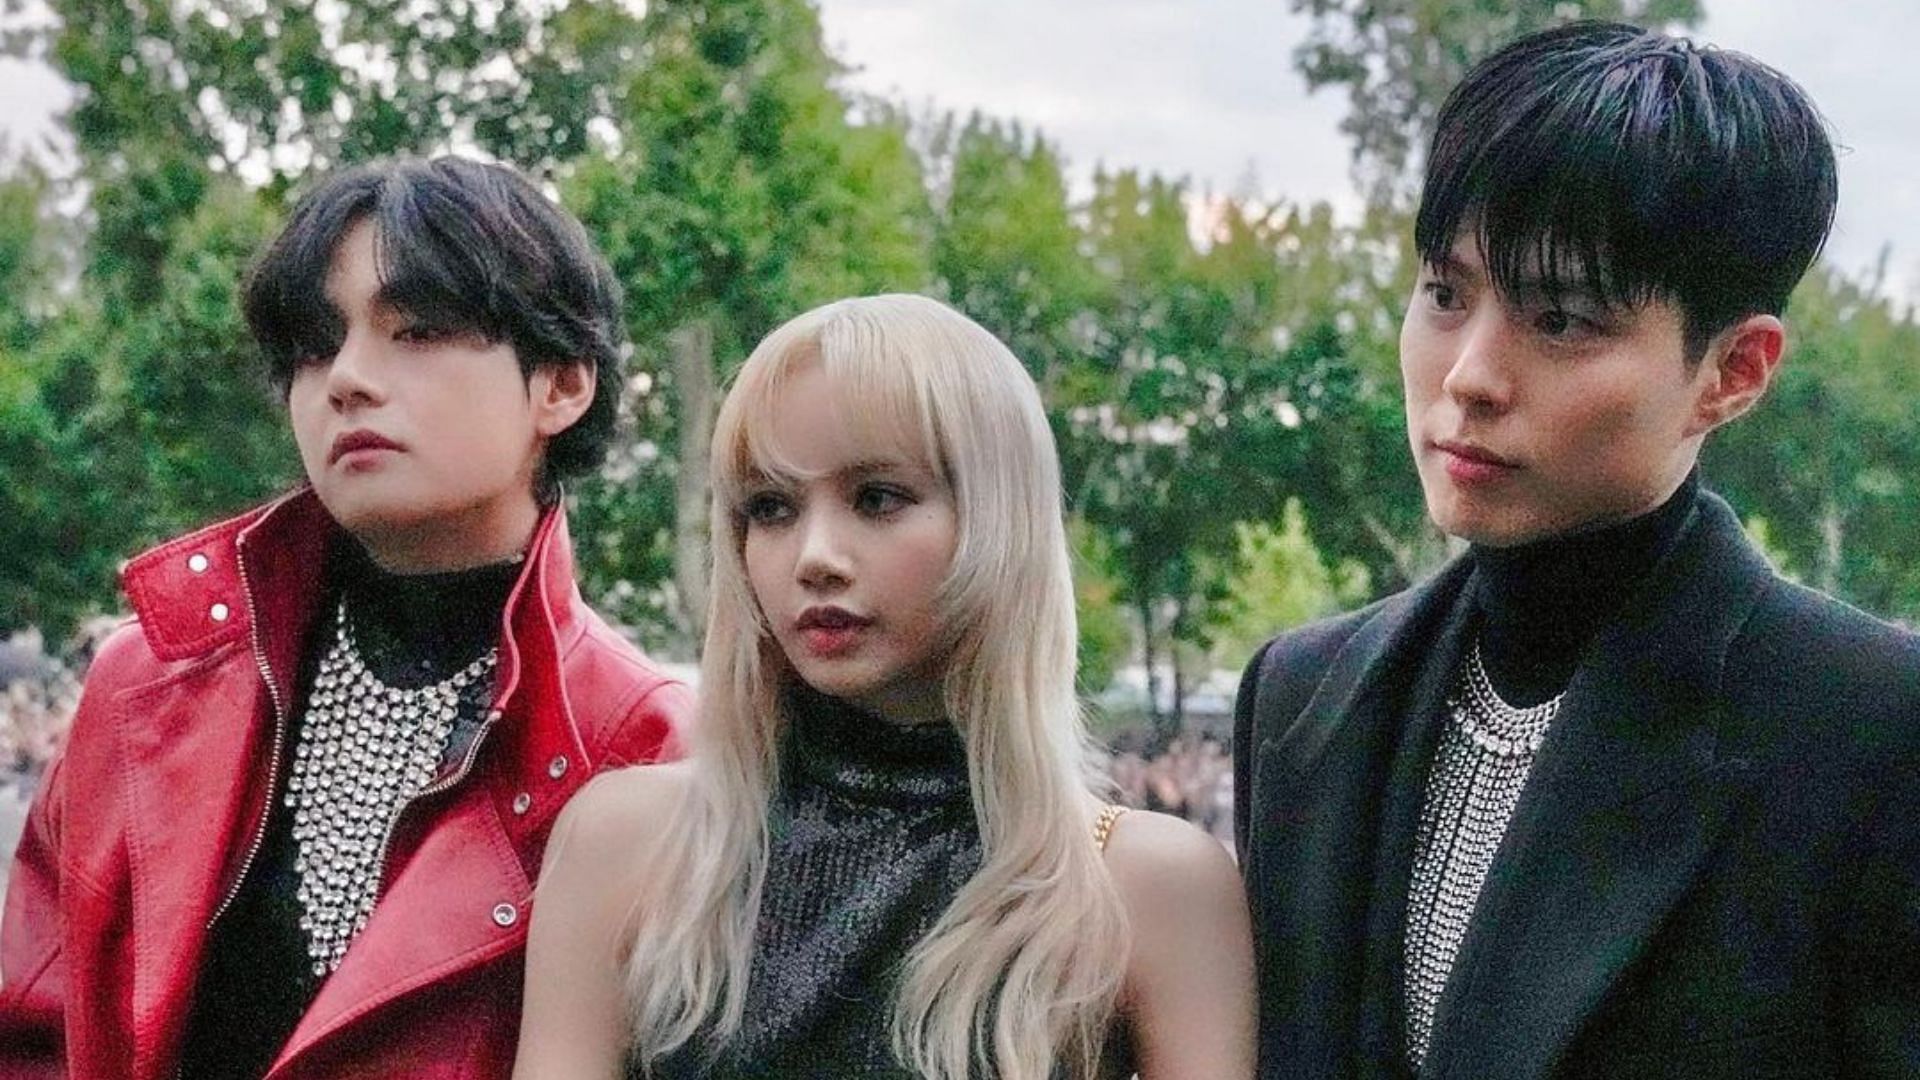 BTS&rsquo; V, BLACKPINK&rsquo;s Lisa, and Park Bo-gum take the world by storm at CELINE Paris Fashion Week (Image via @harpersbazaarjapan/Instagram)